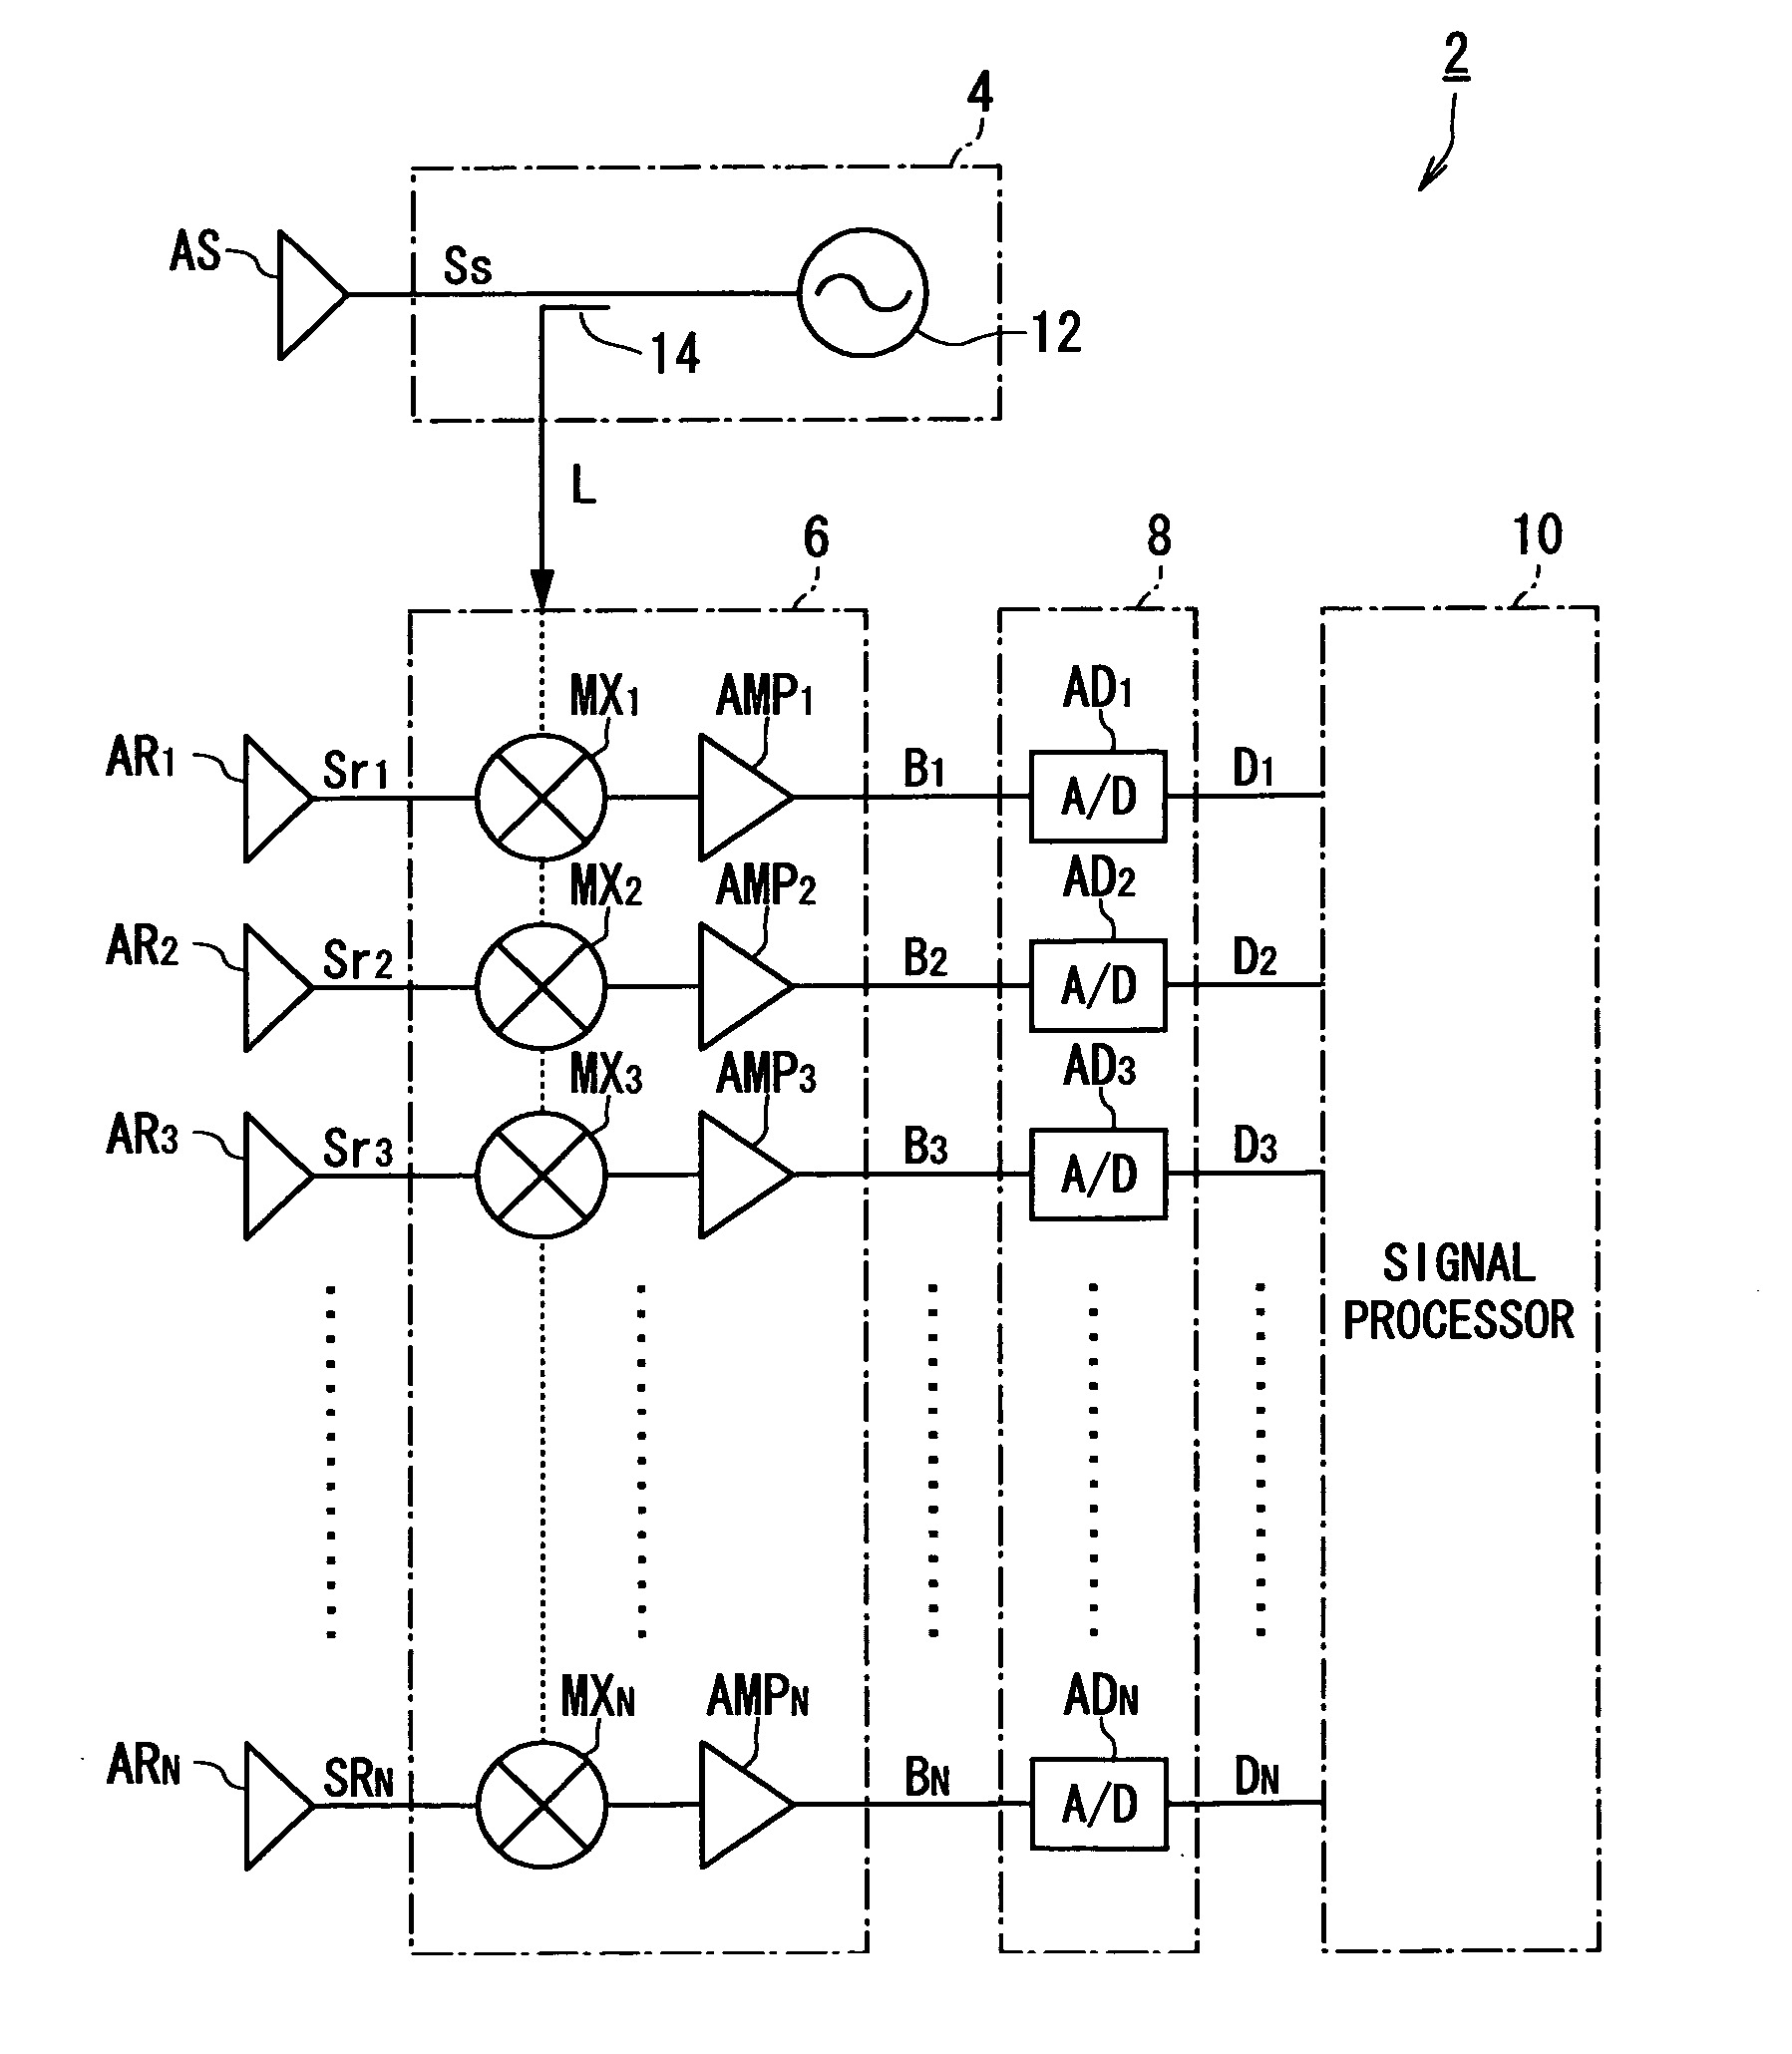 Apparatus for detecting direction of target using difference in phase of radio wave signals received through plural channels